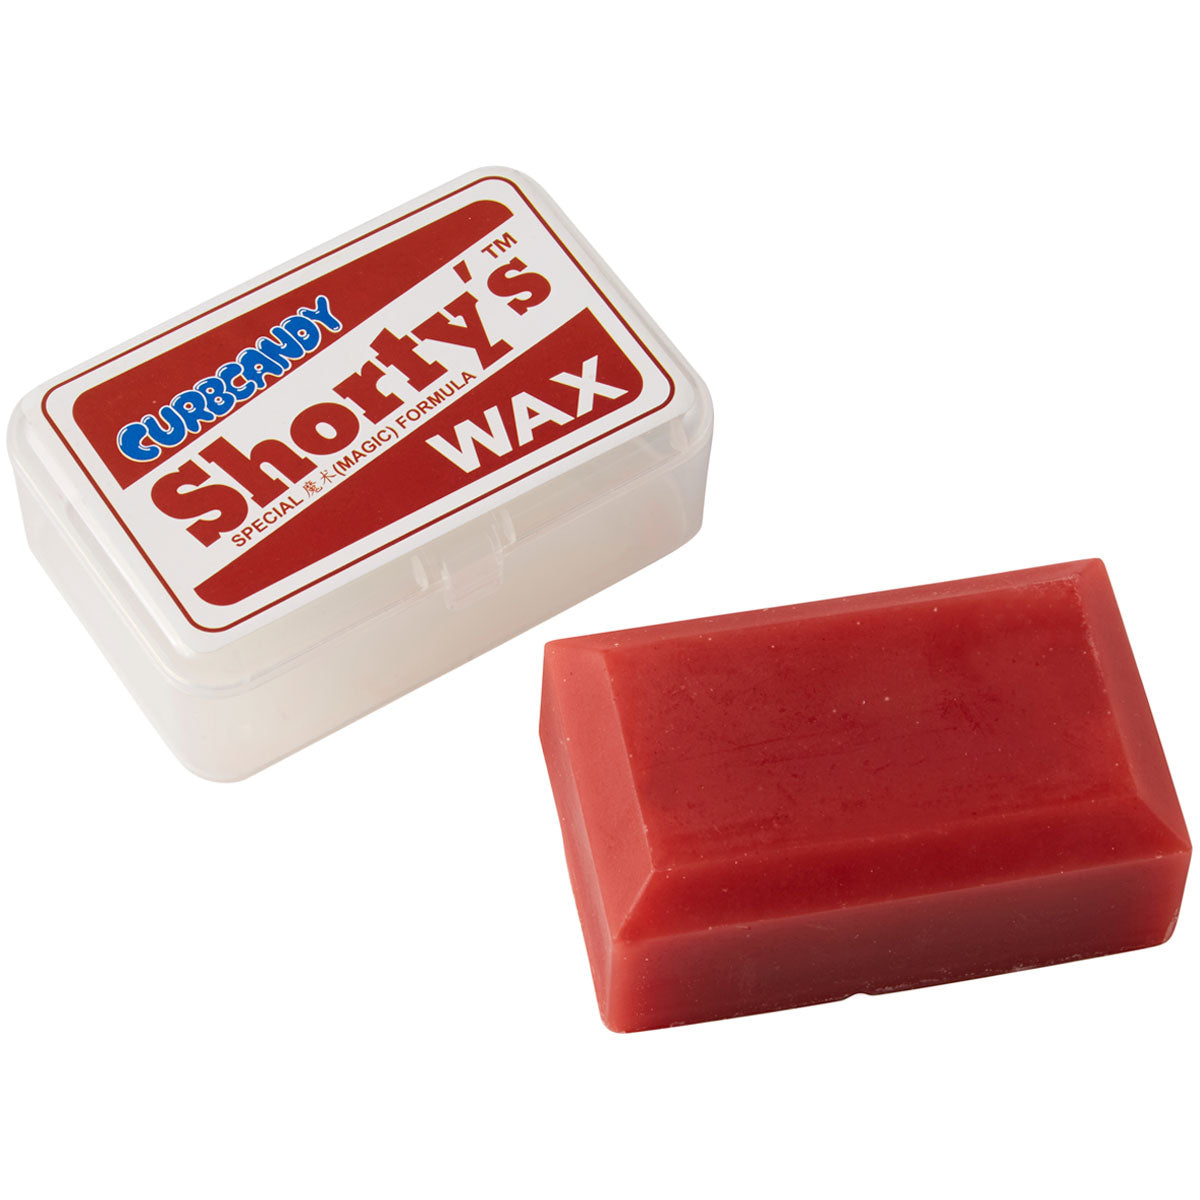 Shorty's Curb Candy WAX-IN-A-BOX Skate Wax image 1